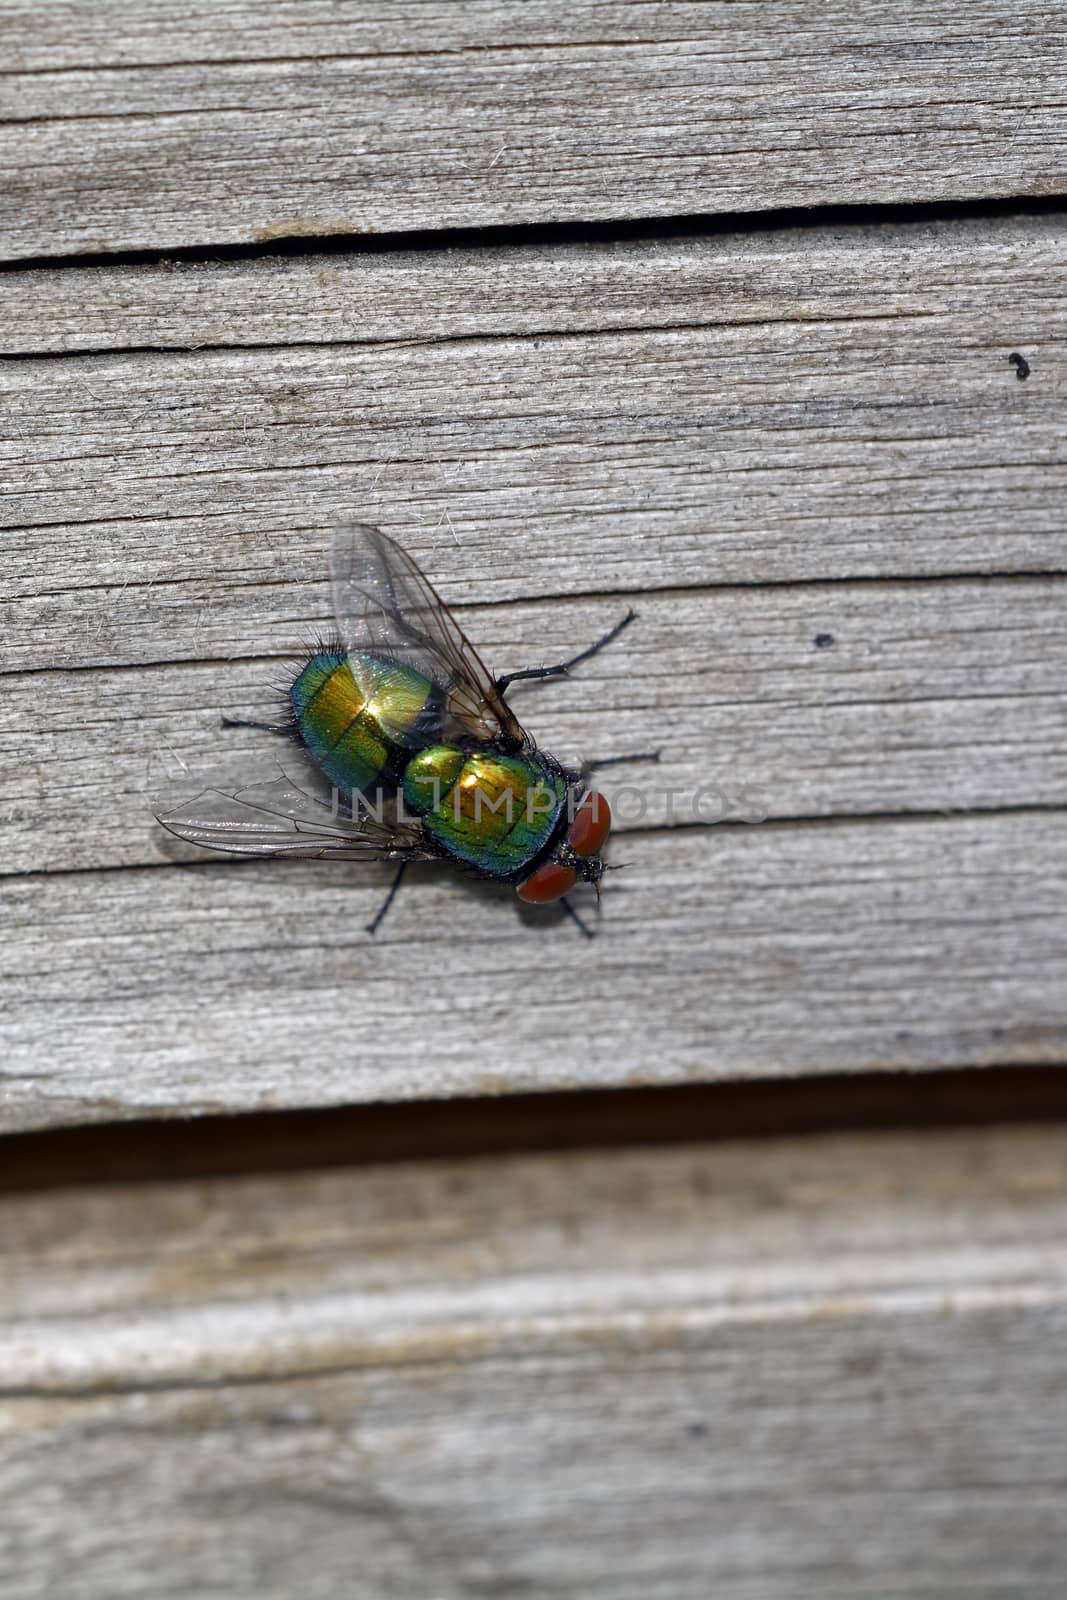 Green fly with brown eyes sitting on the grey wood.